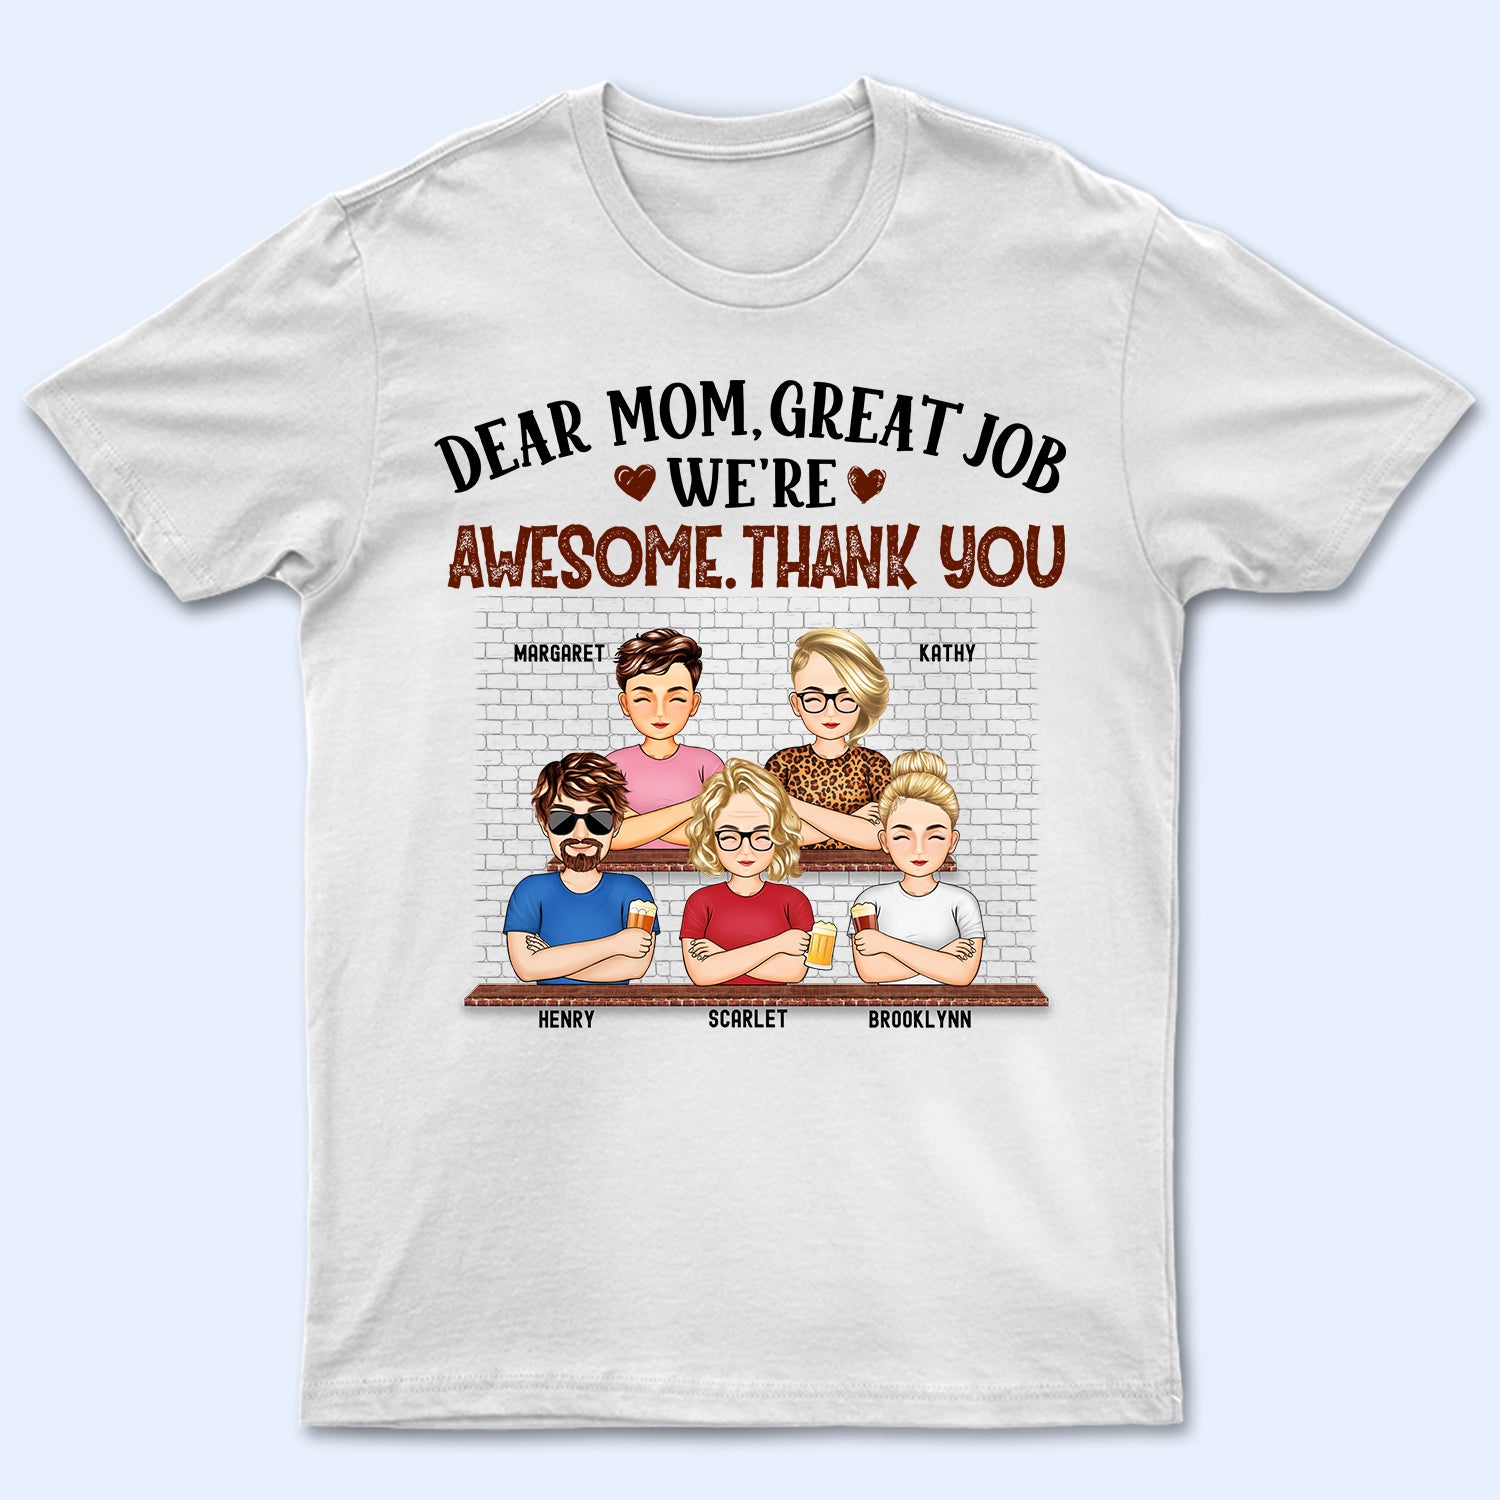 Dear Mom Great Job We're Awesome Thank You - Birthday, Loving Gift For Mommy, Mother, Grandma, Grandmother - Personalized Custom T Shirt